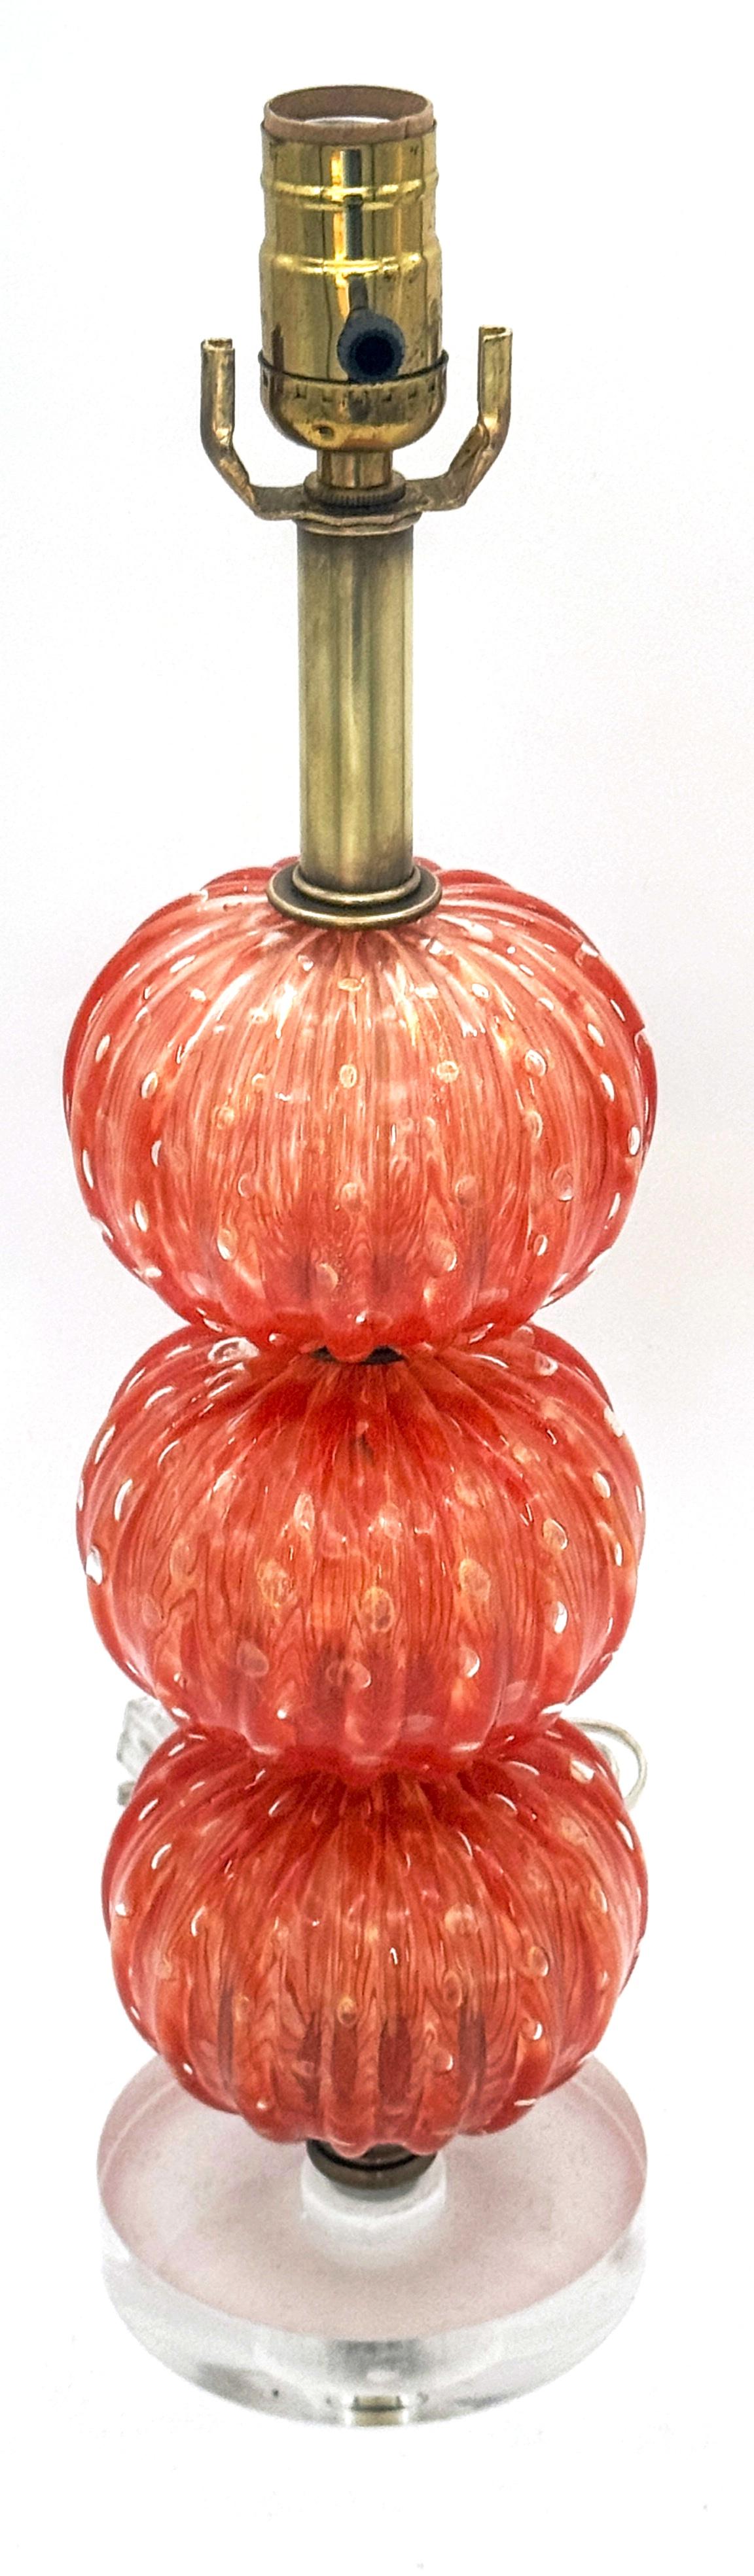 Barovier & Toso Pulegoso Orange Murano Glass & Lucite Stacked Orb Column Lamp 
Italy, 20th century 

An exquisite Barovier & Toso Pulegoso Orange Murano Glass & Lucite Stacked Orb Column Lamp, originating from Italy in the 20th century Standing at